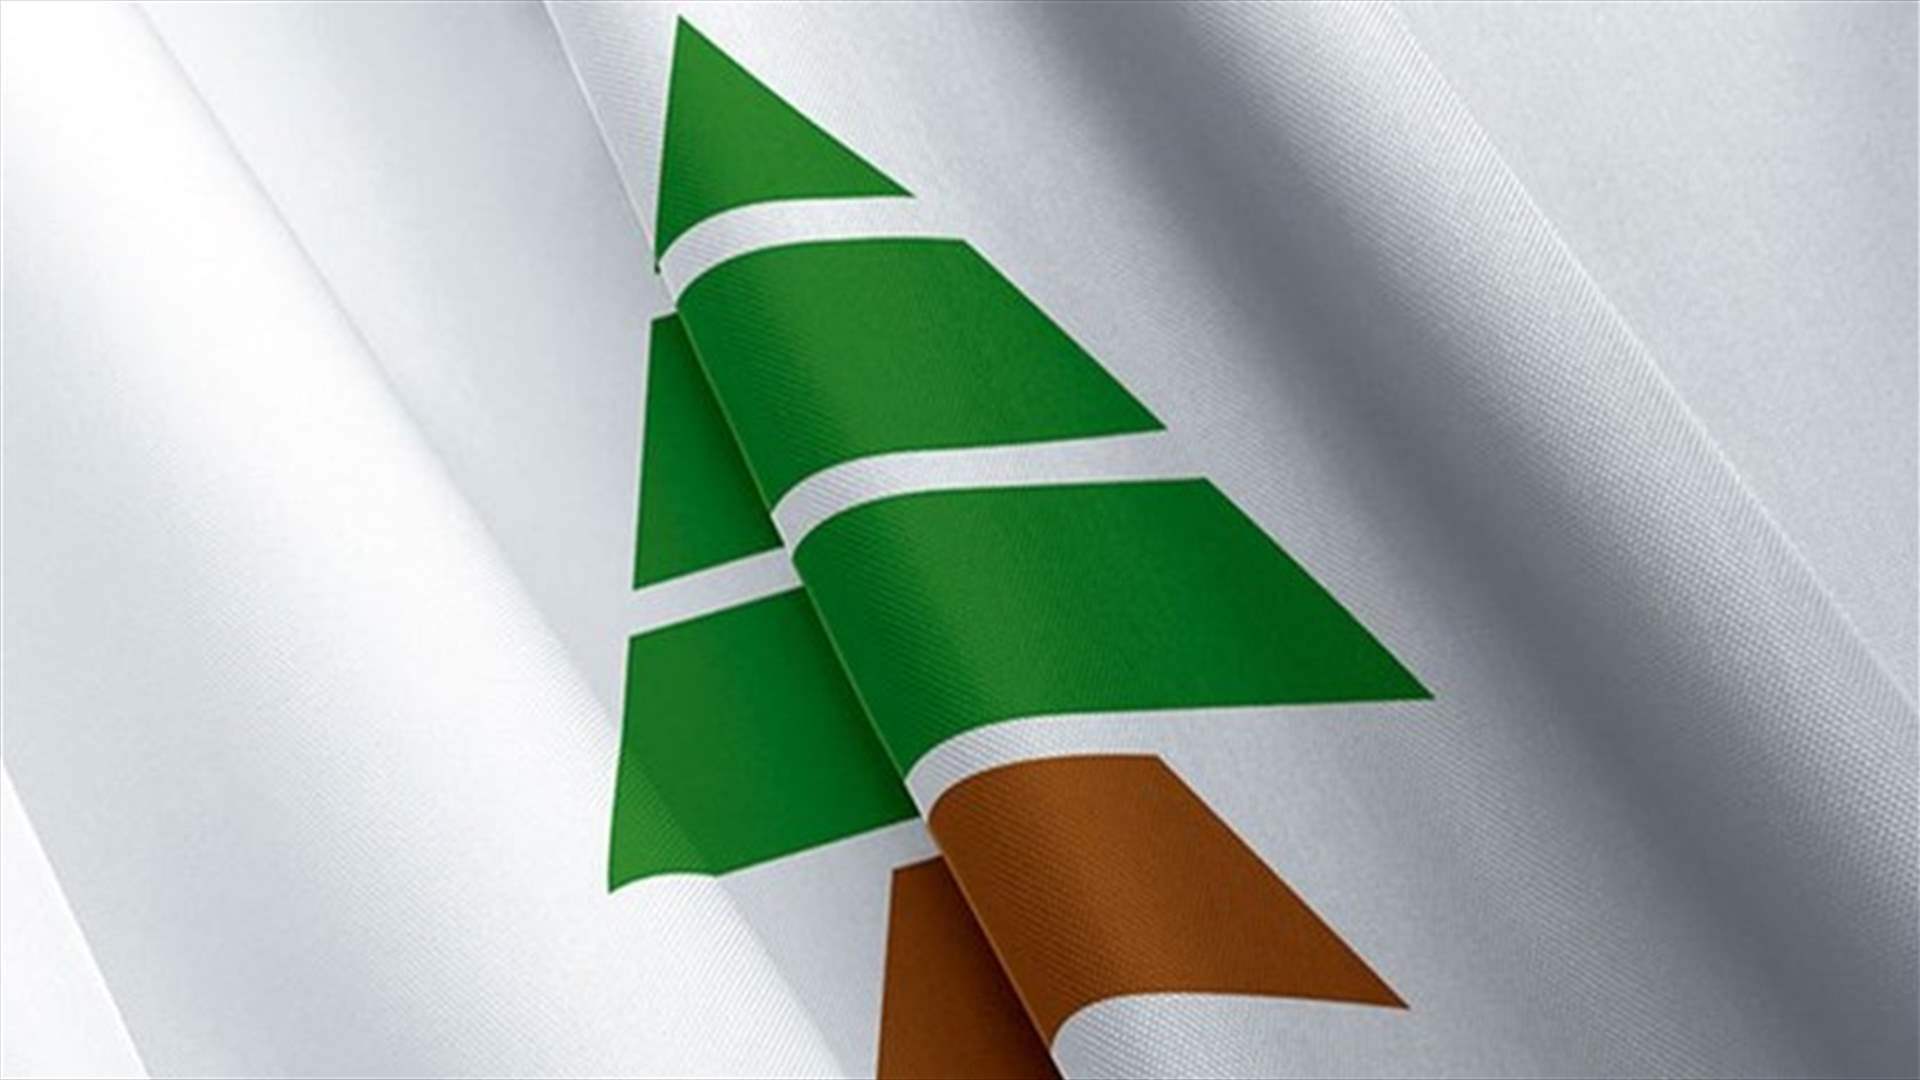 Kataeb Party raises alarms over Hezbollah&#39;s continued presidential &#39;control&#39;